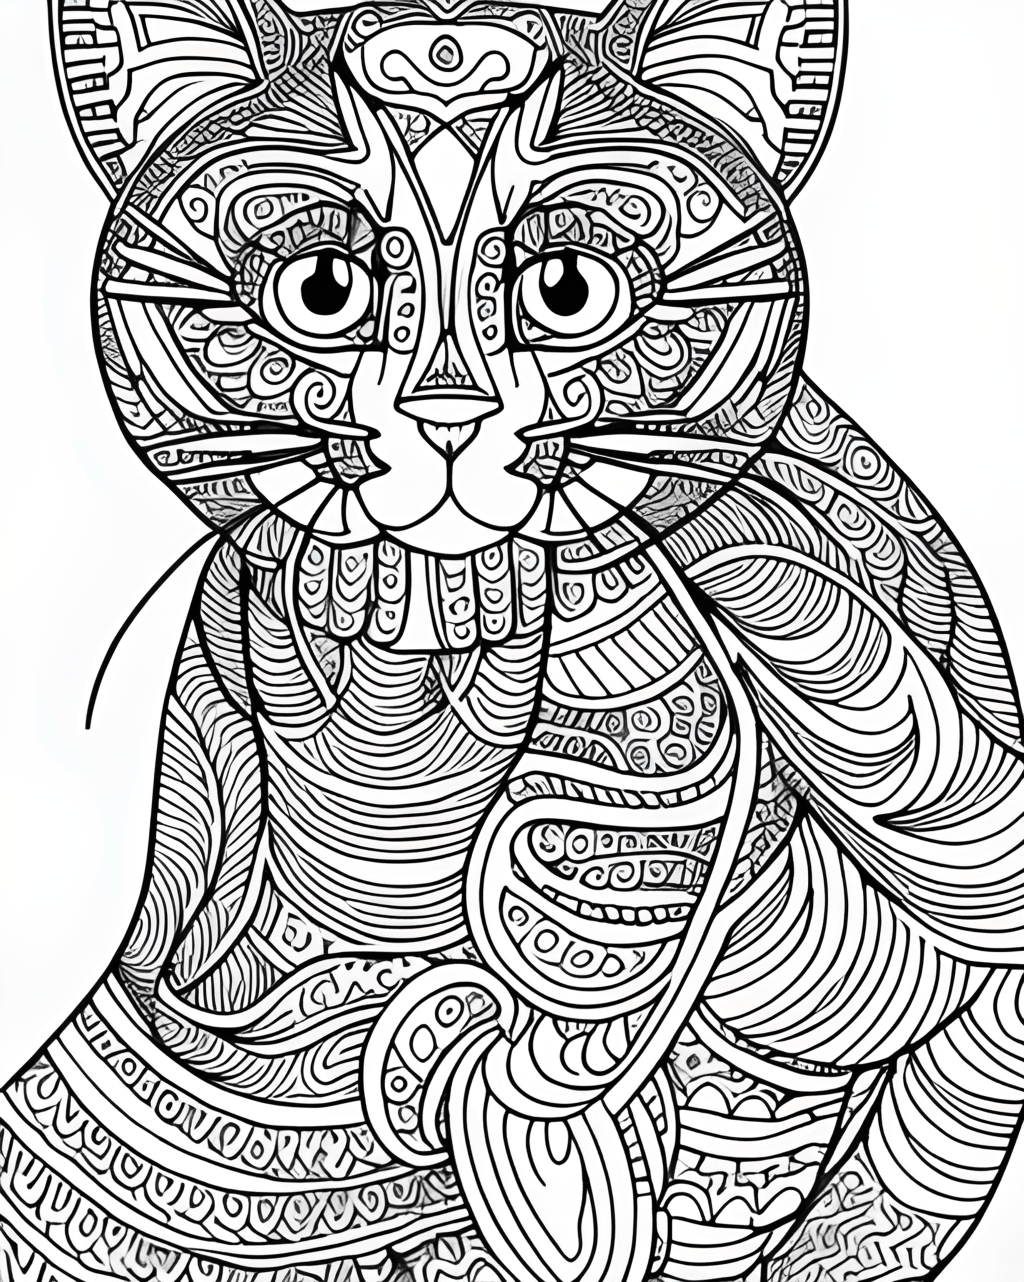 Cat Coloring Page Black and White Illustration Hyper Realistic ...